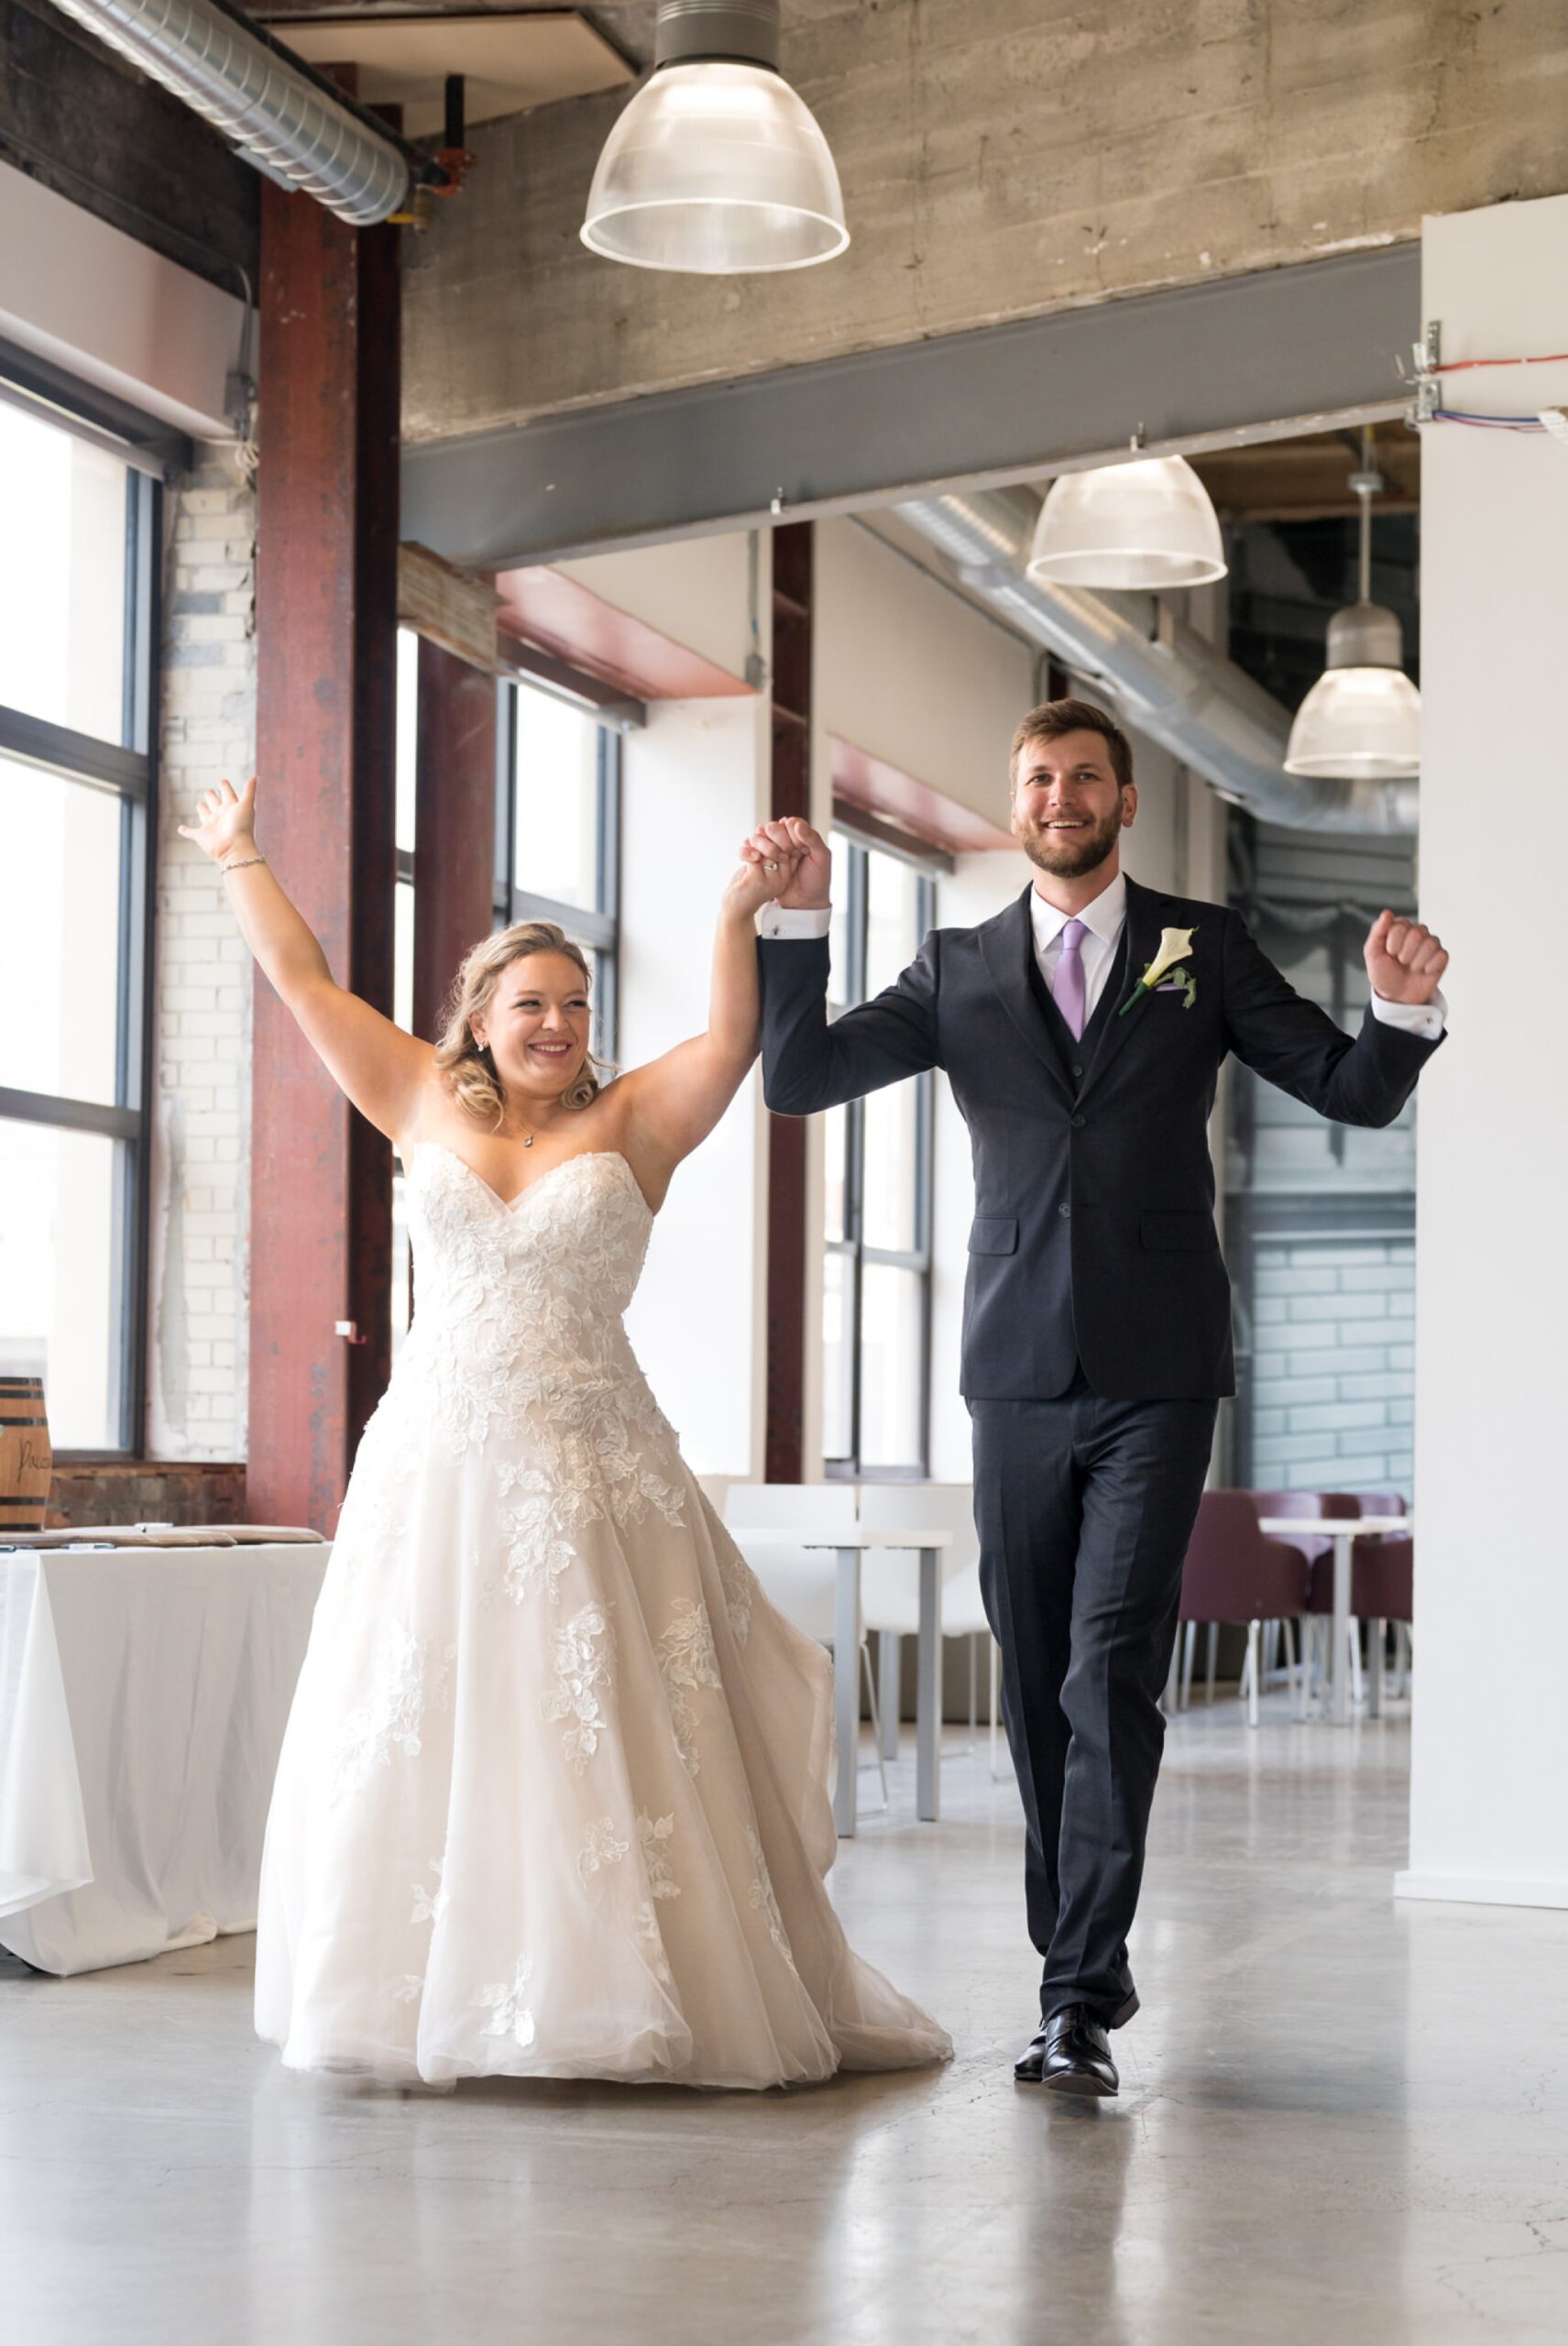 Bride and groom are announced and enter their reception space at a Madison Building wedding.  